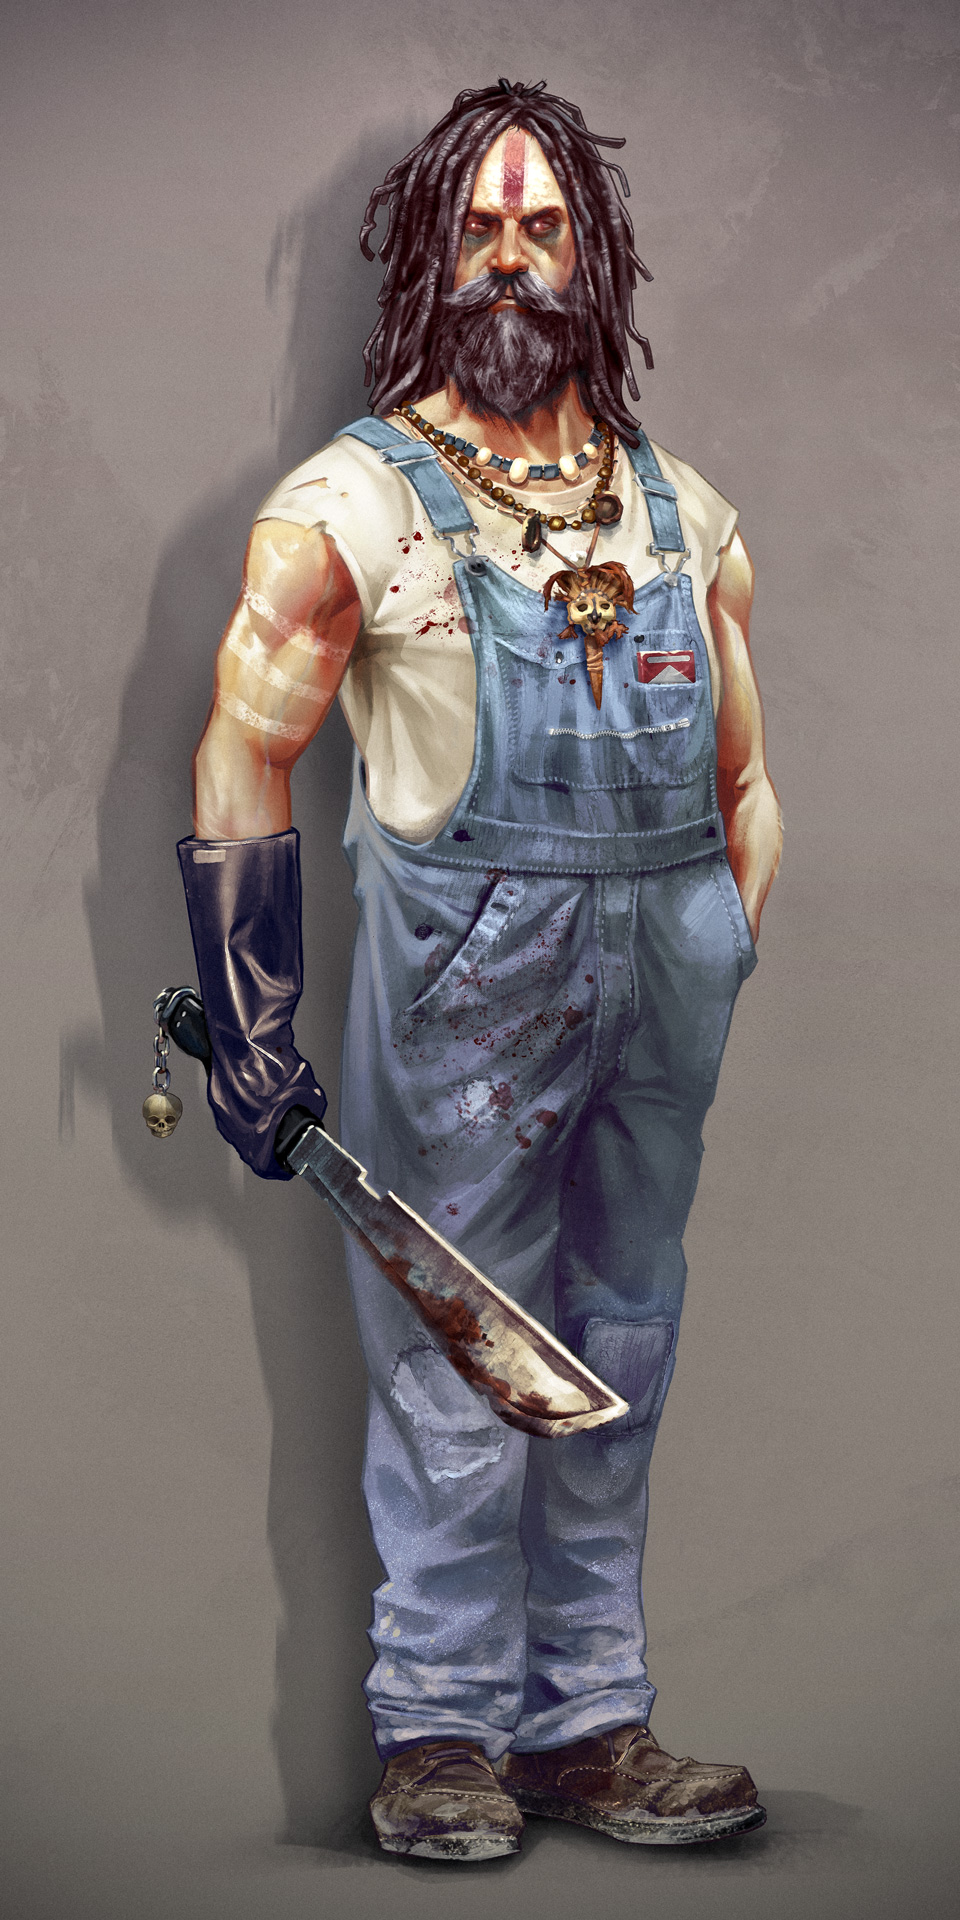 2d, photoshop, concept, character, cannibal, redeck